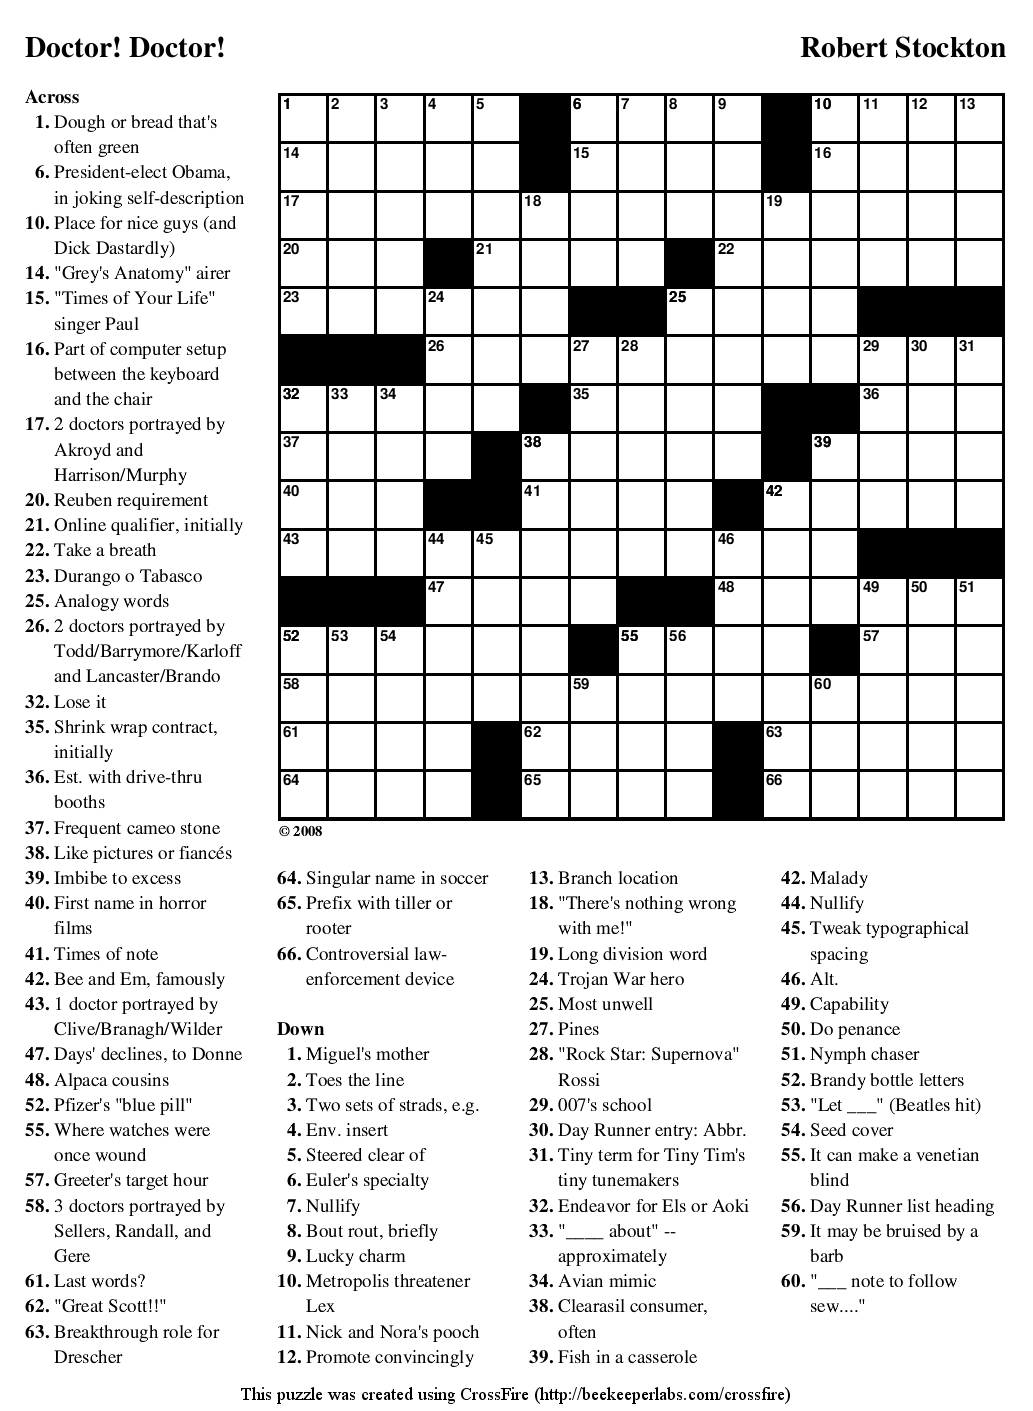 Crossword Puzzles Printable - Yahoo Image Search Results | Crossword - Free Printable Crossword Puzzle Builder